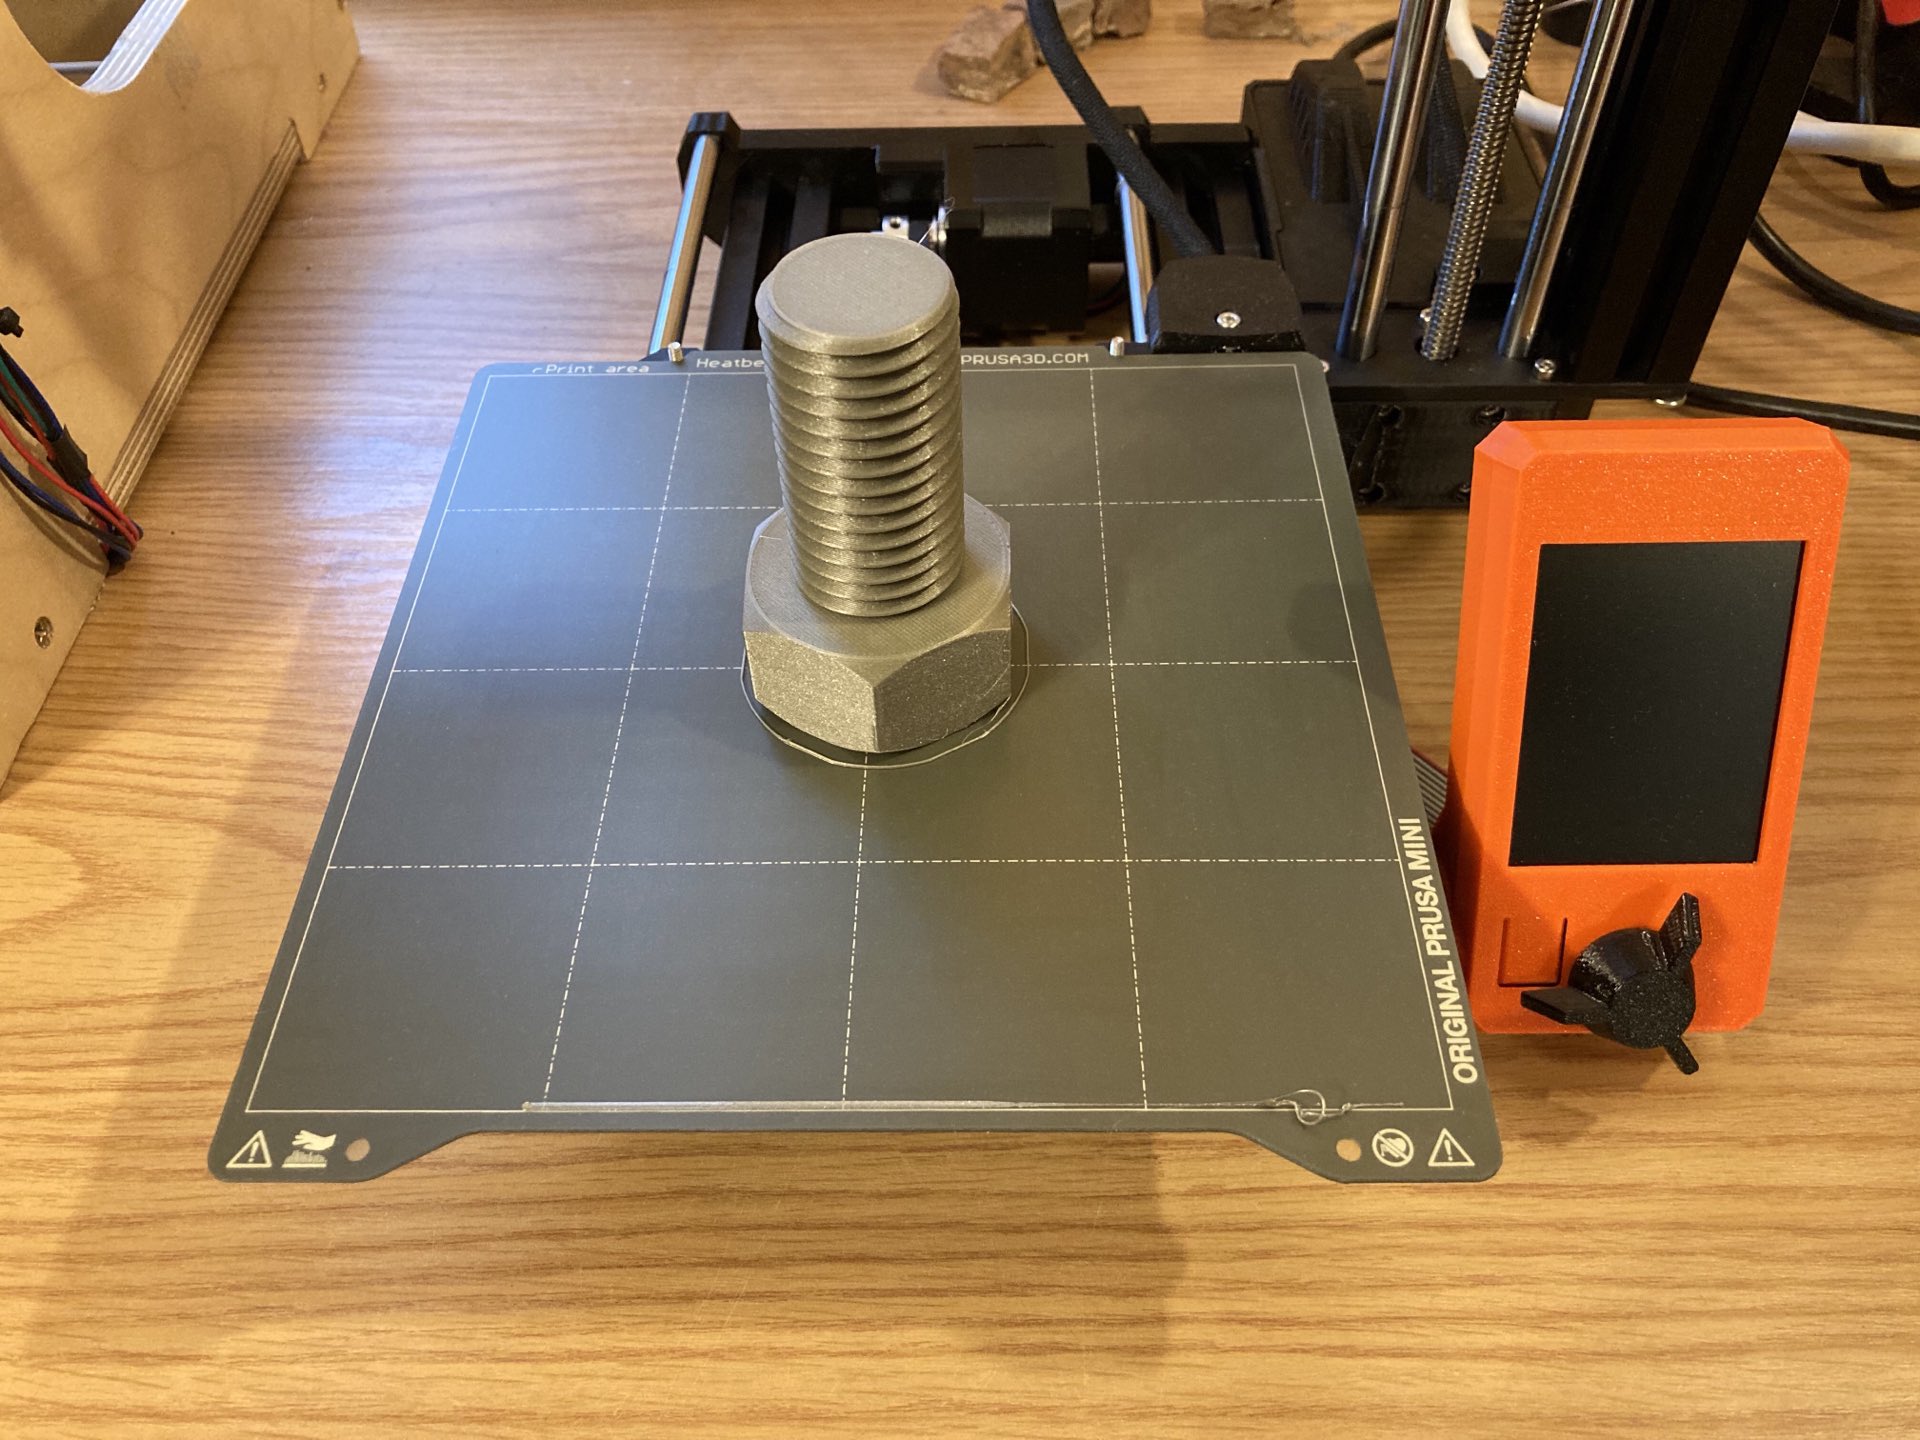 COB CNC on Twitter: with the Prusa Mini ease of setup and print quality: Fourth print, pretty much out the box https://t.co/GOk7qmuytO" / Twitter